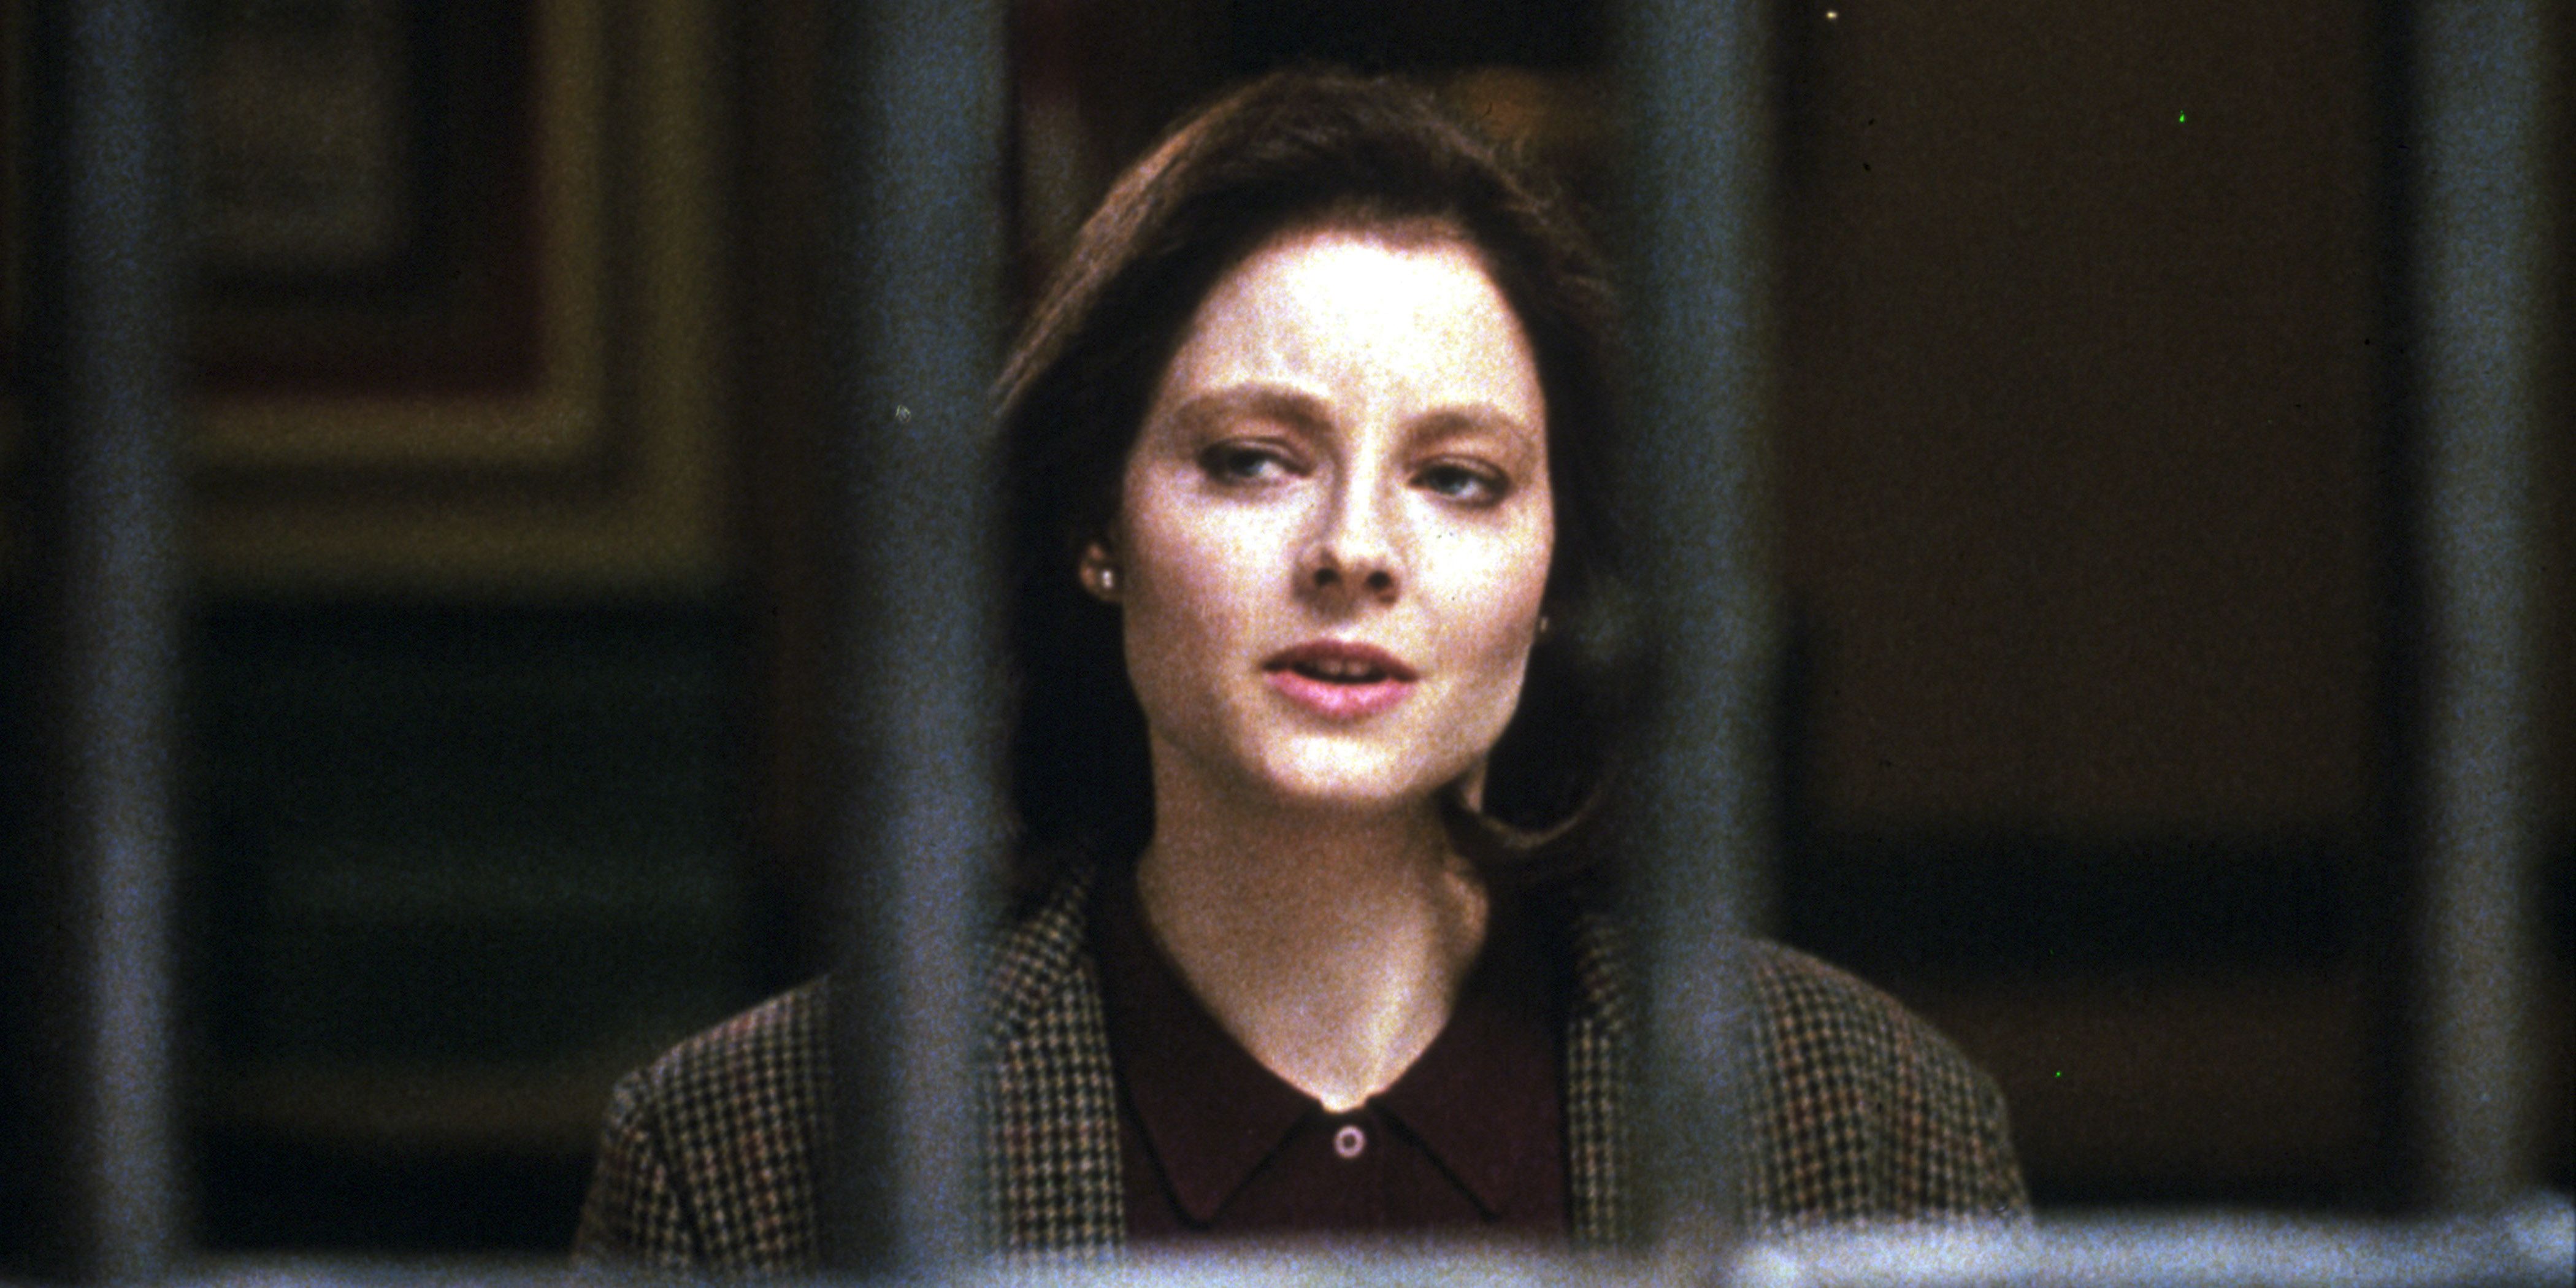 Jodie Foster as Clarice Starling in The Silence of the Lambs